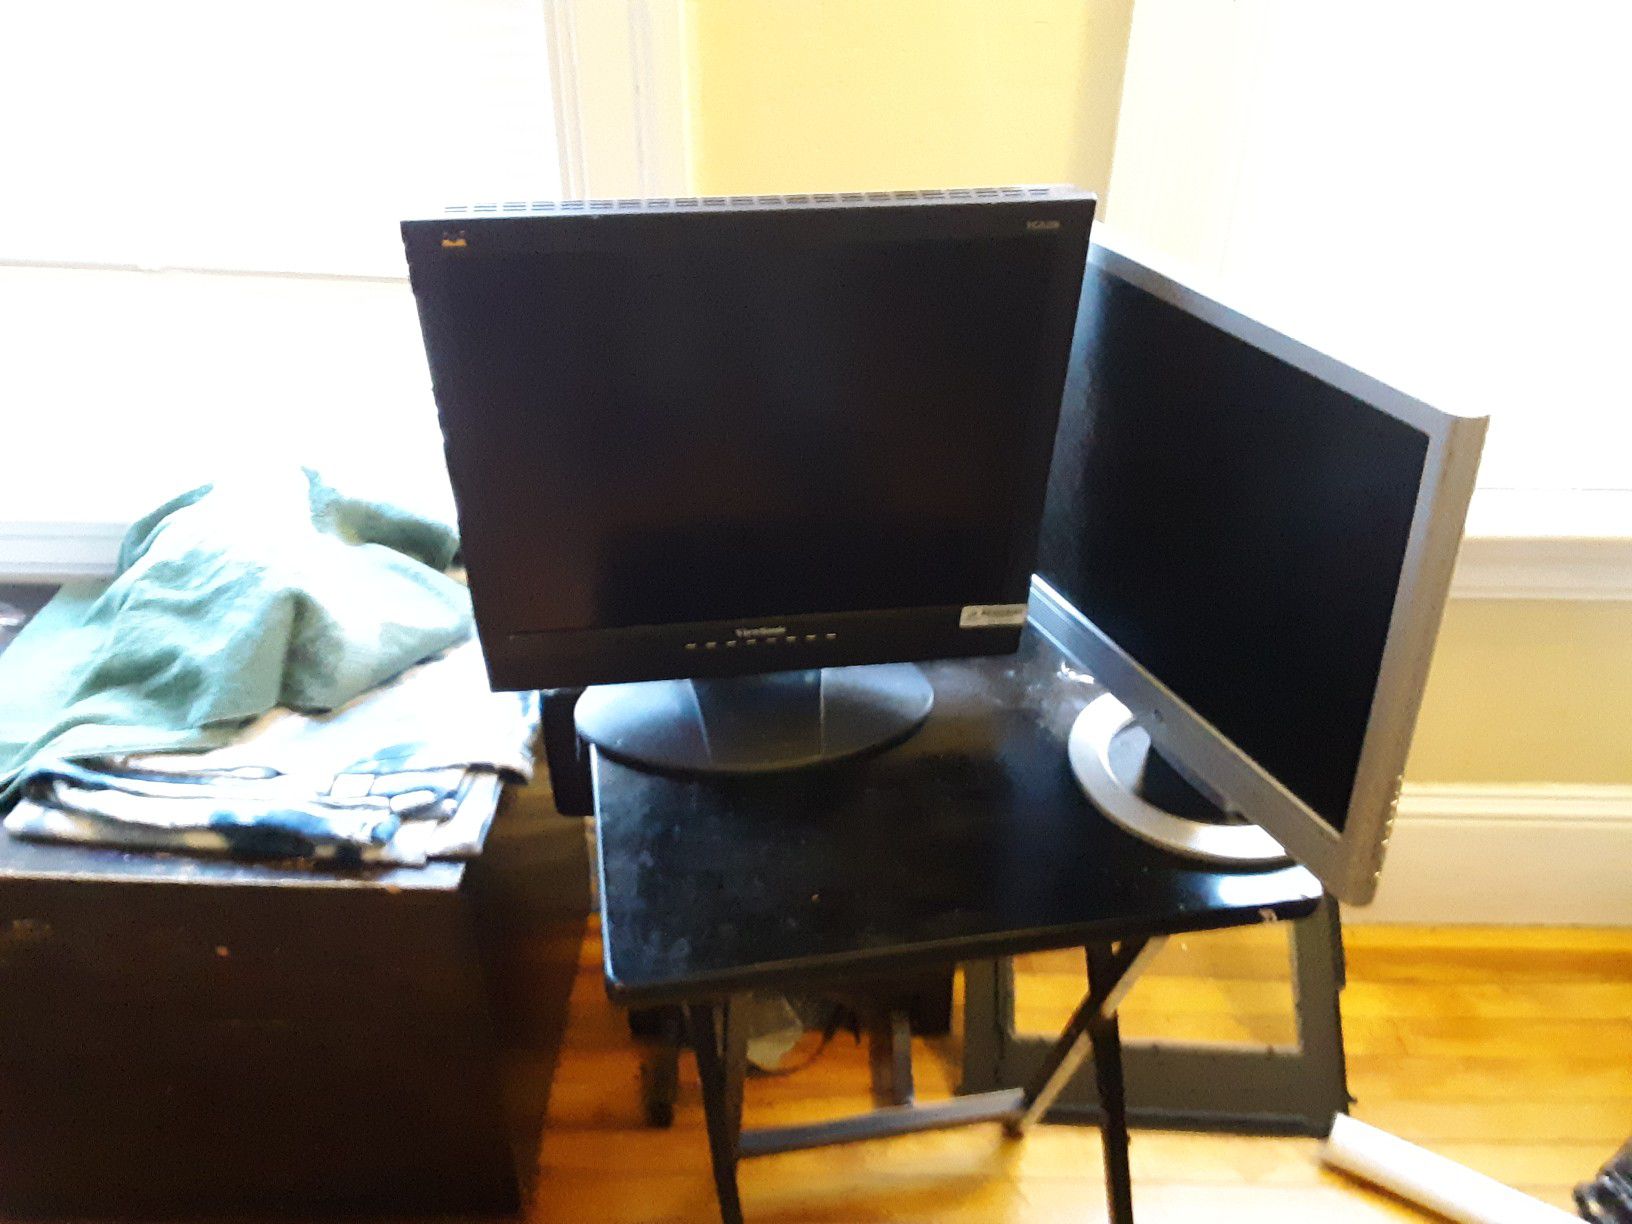 FREE monitors. Older but working just fine. Need gone asap or will end up in dumpster